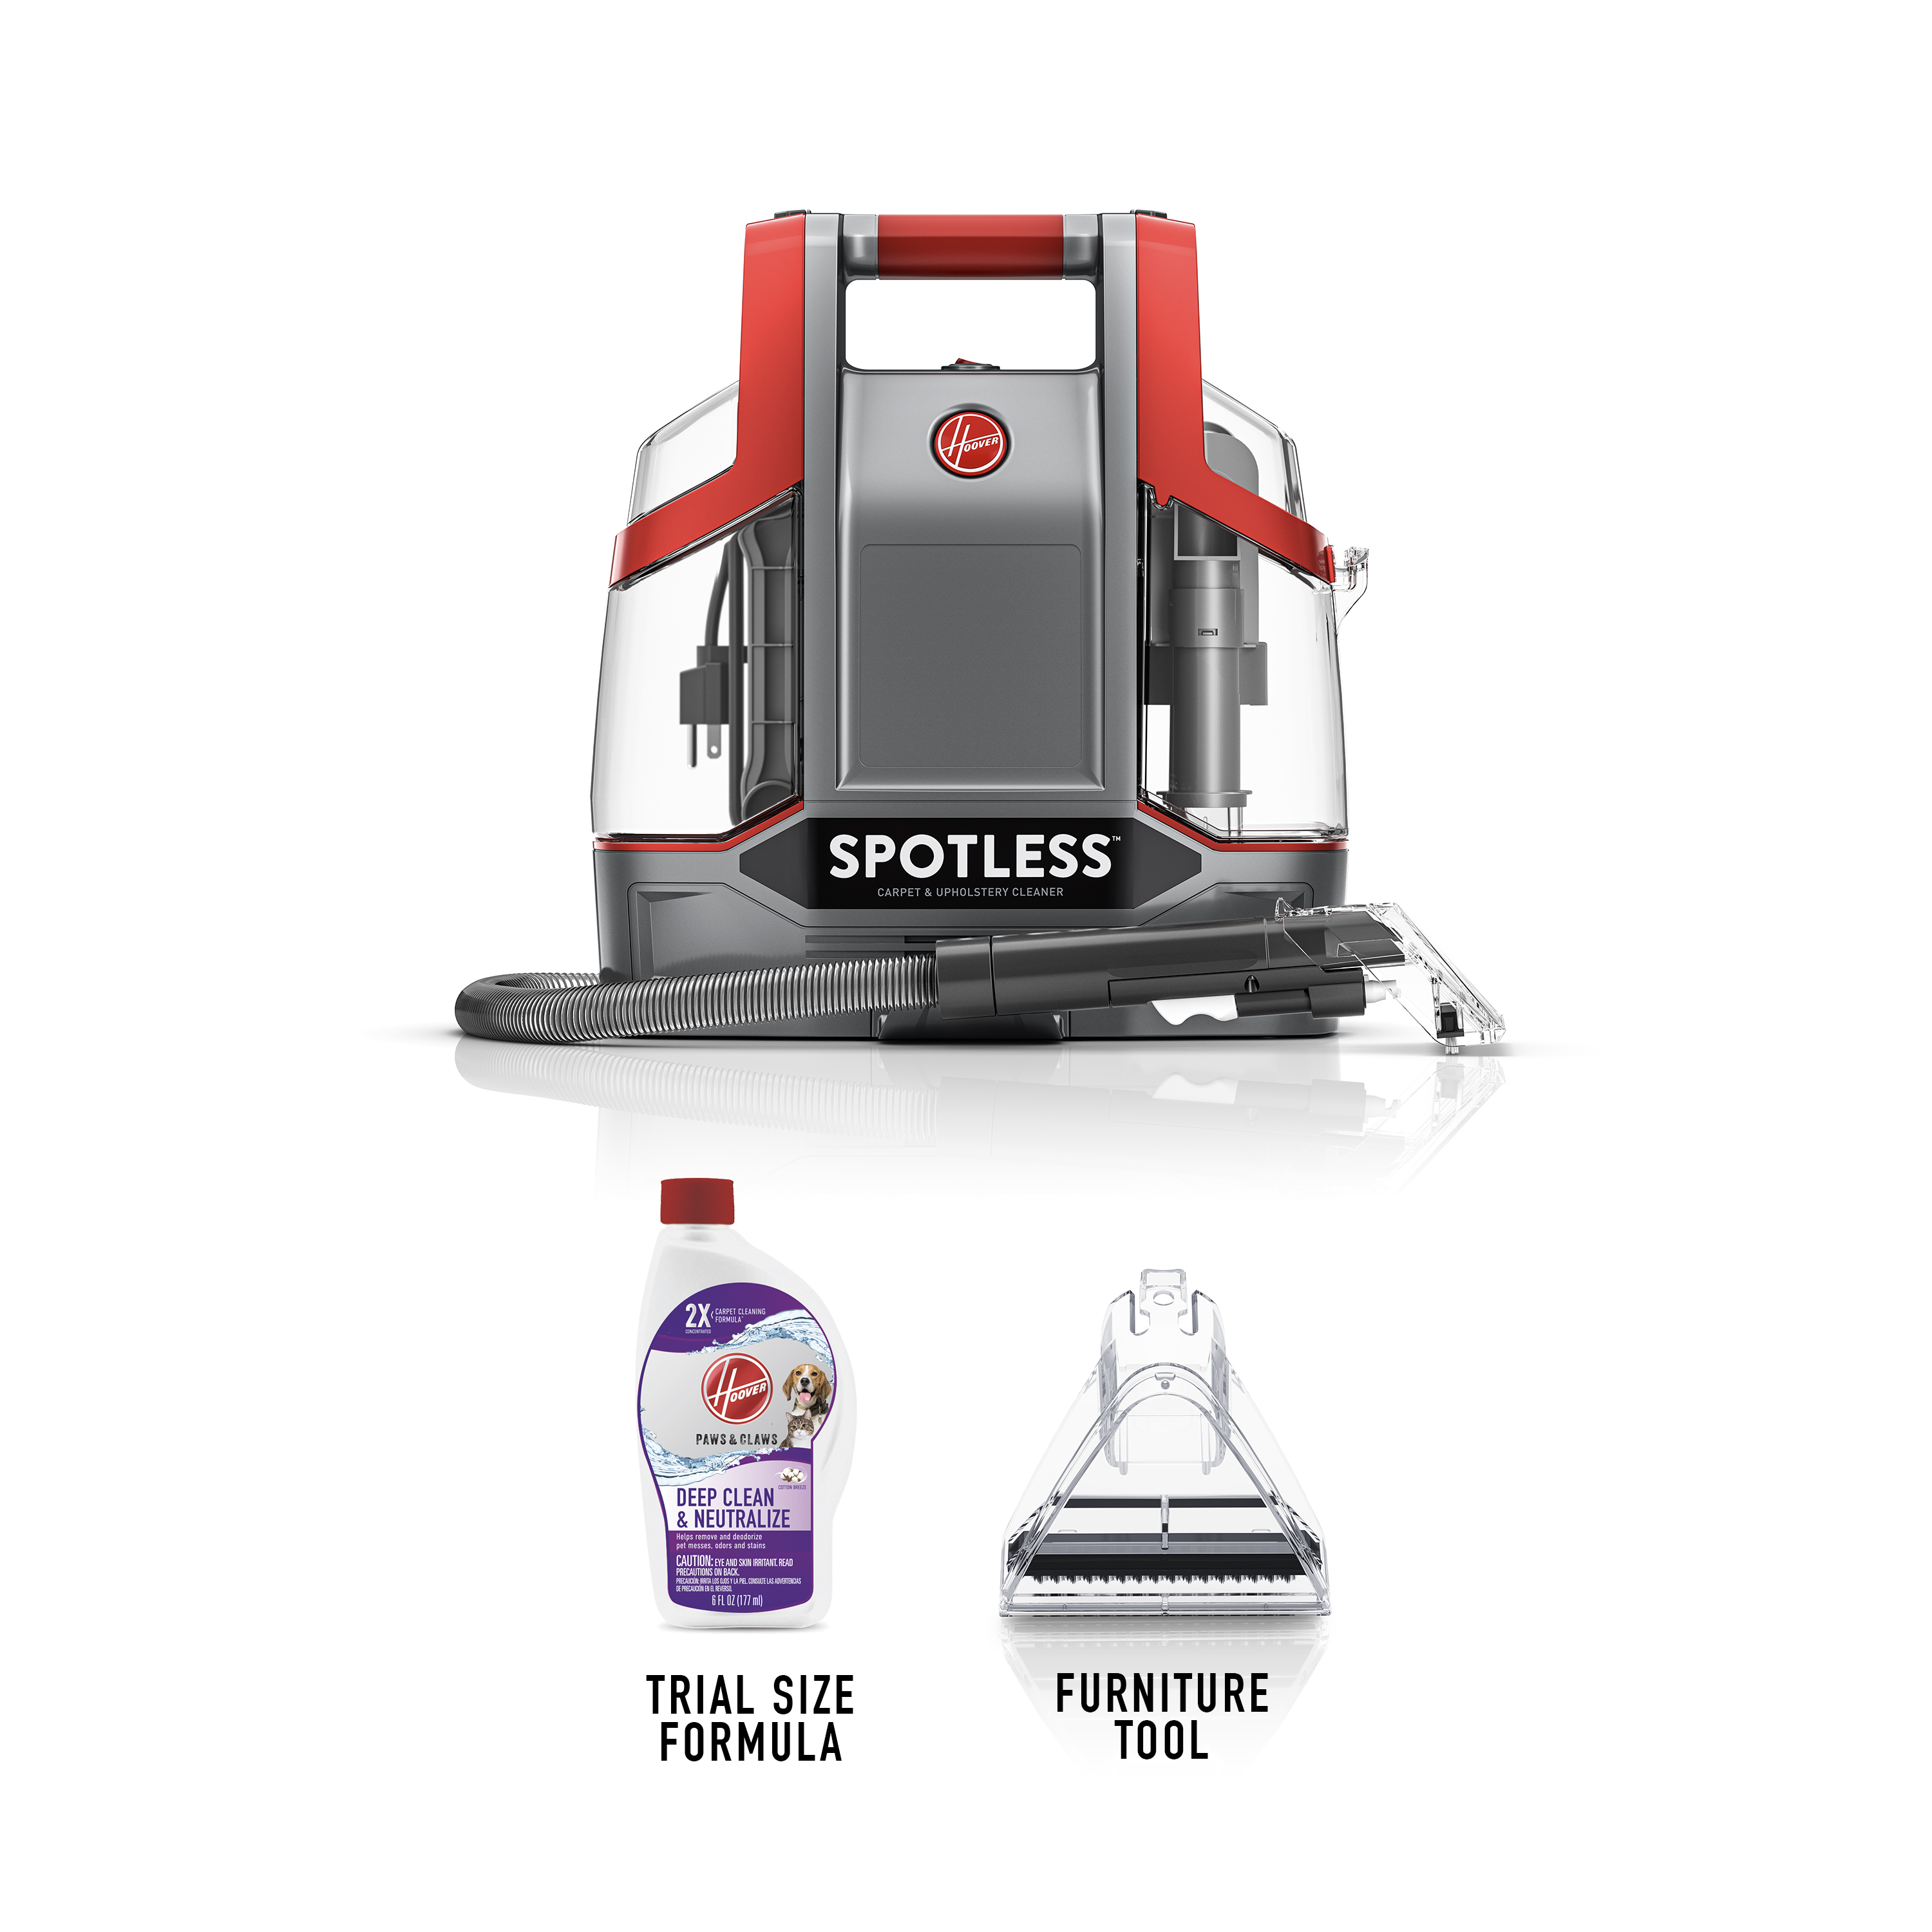 Hoover Spotless Portable Carpet and Upholstery Spot Cleaner, FH11201 - image 4 of 14